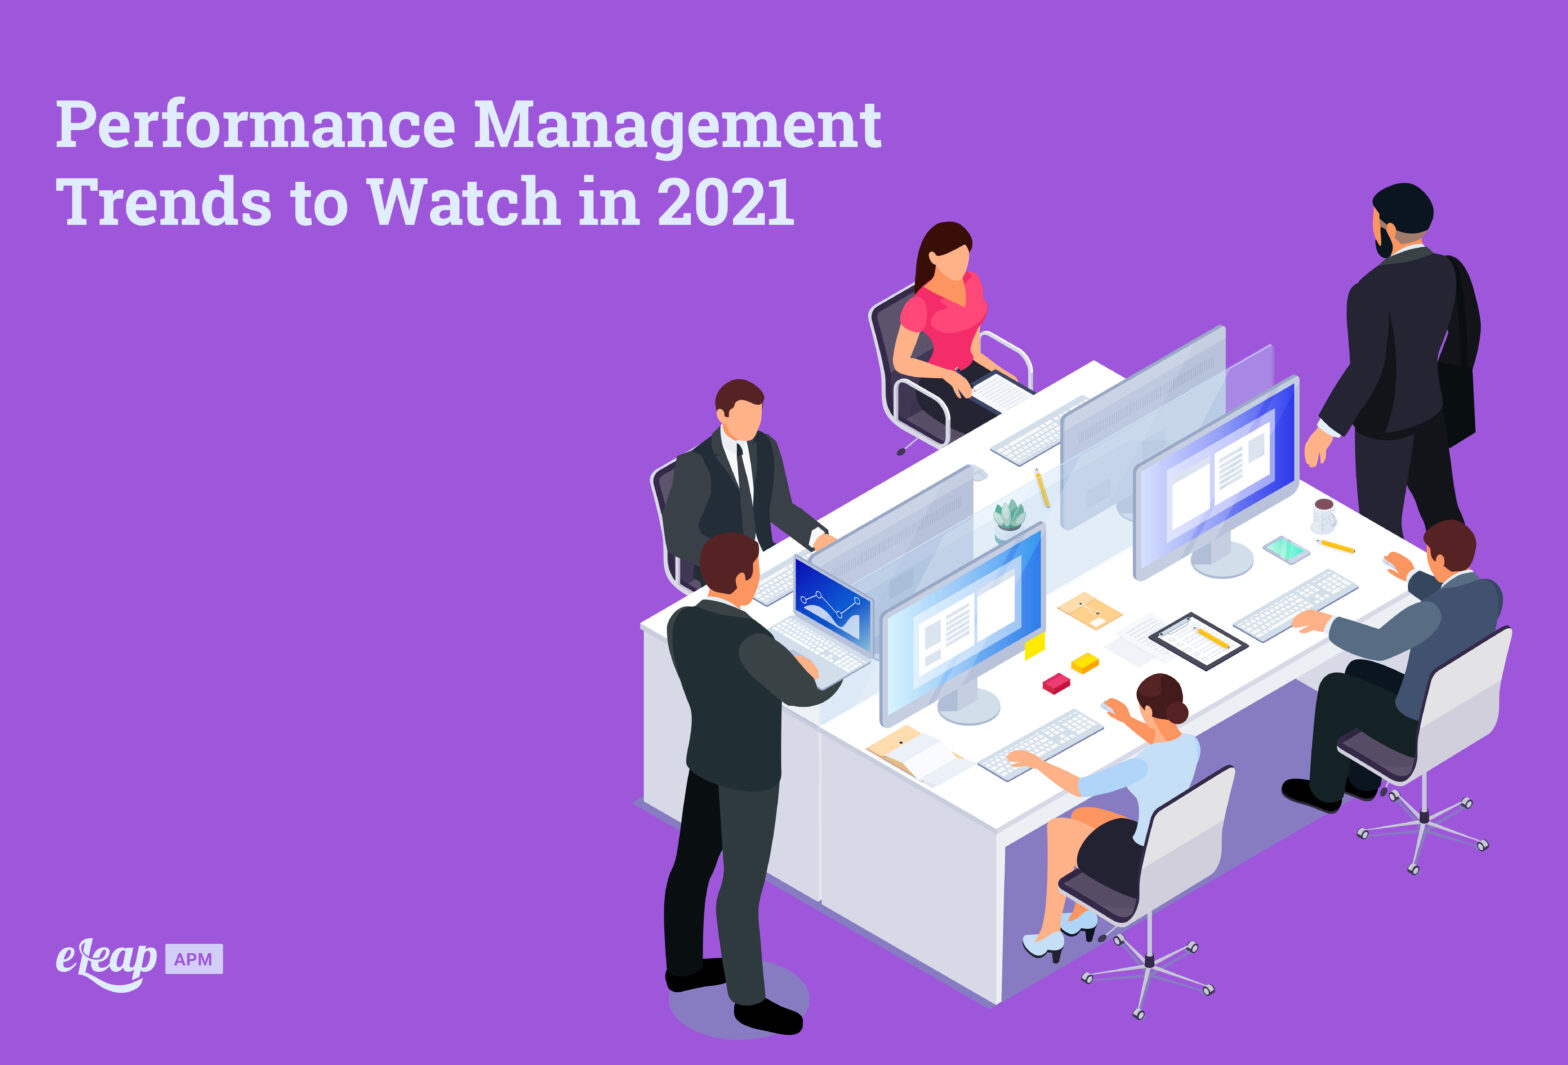 Performance Management Trends to Watch in 2021